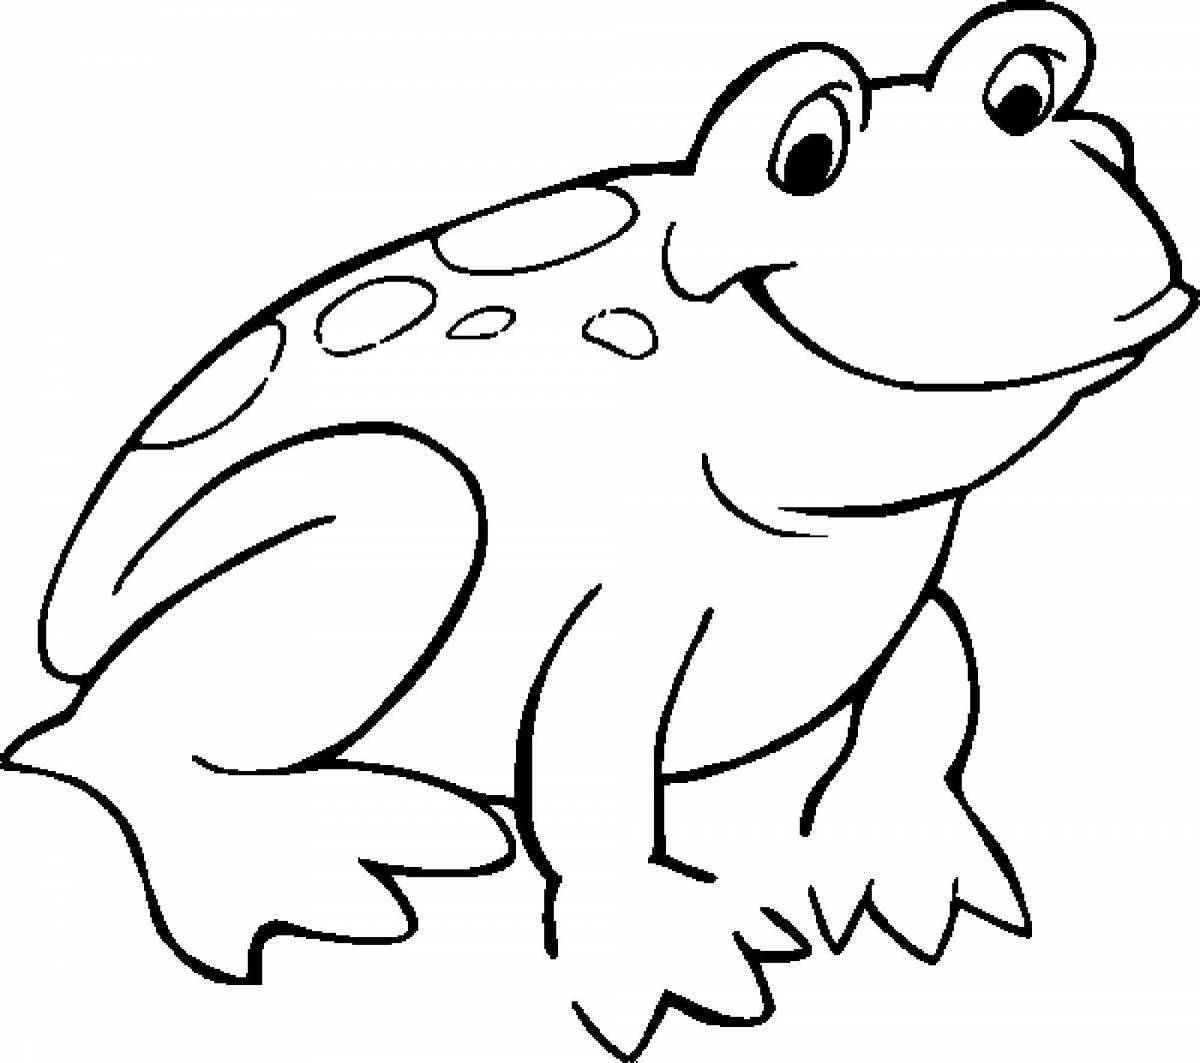 Cute toad coloring book for kids